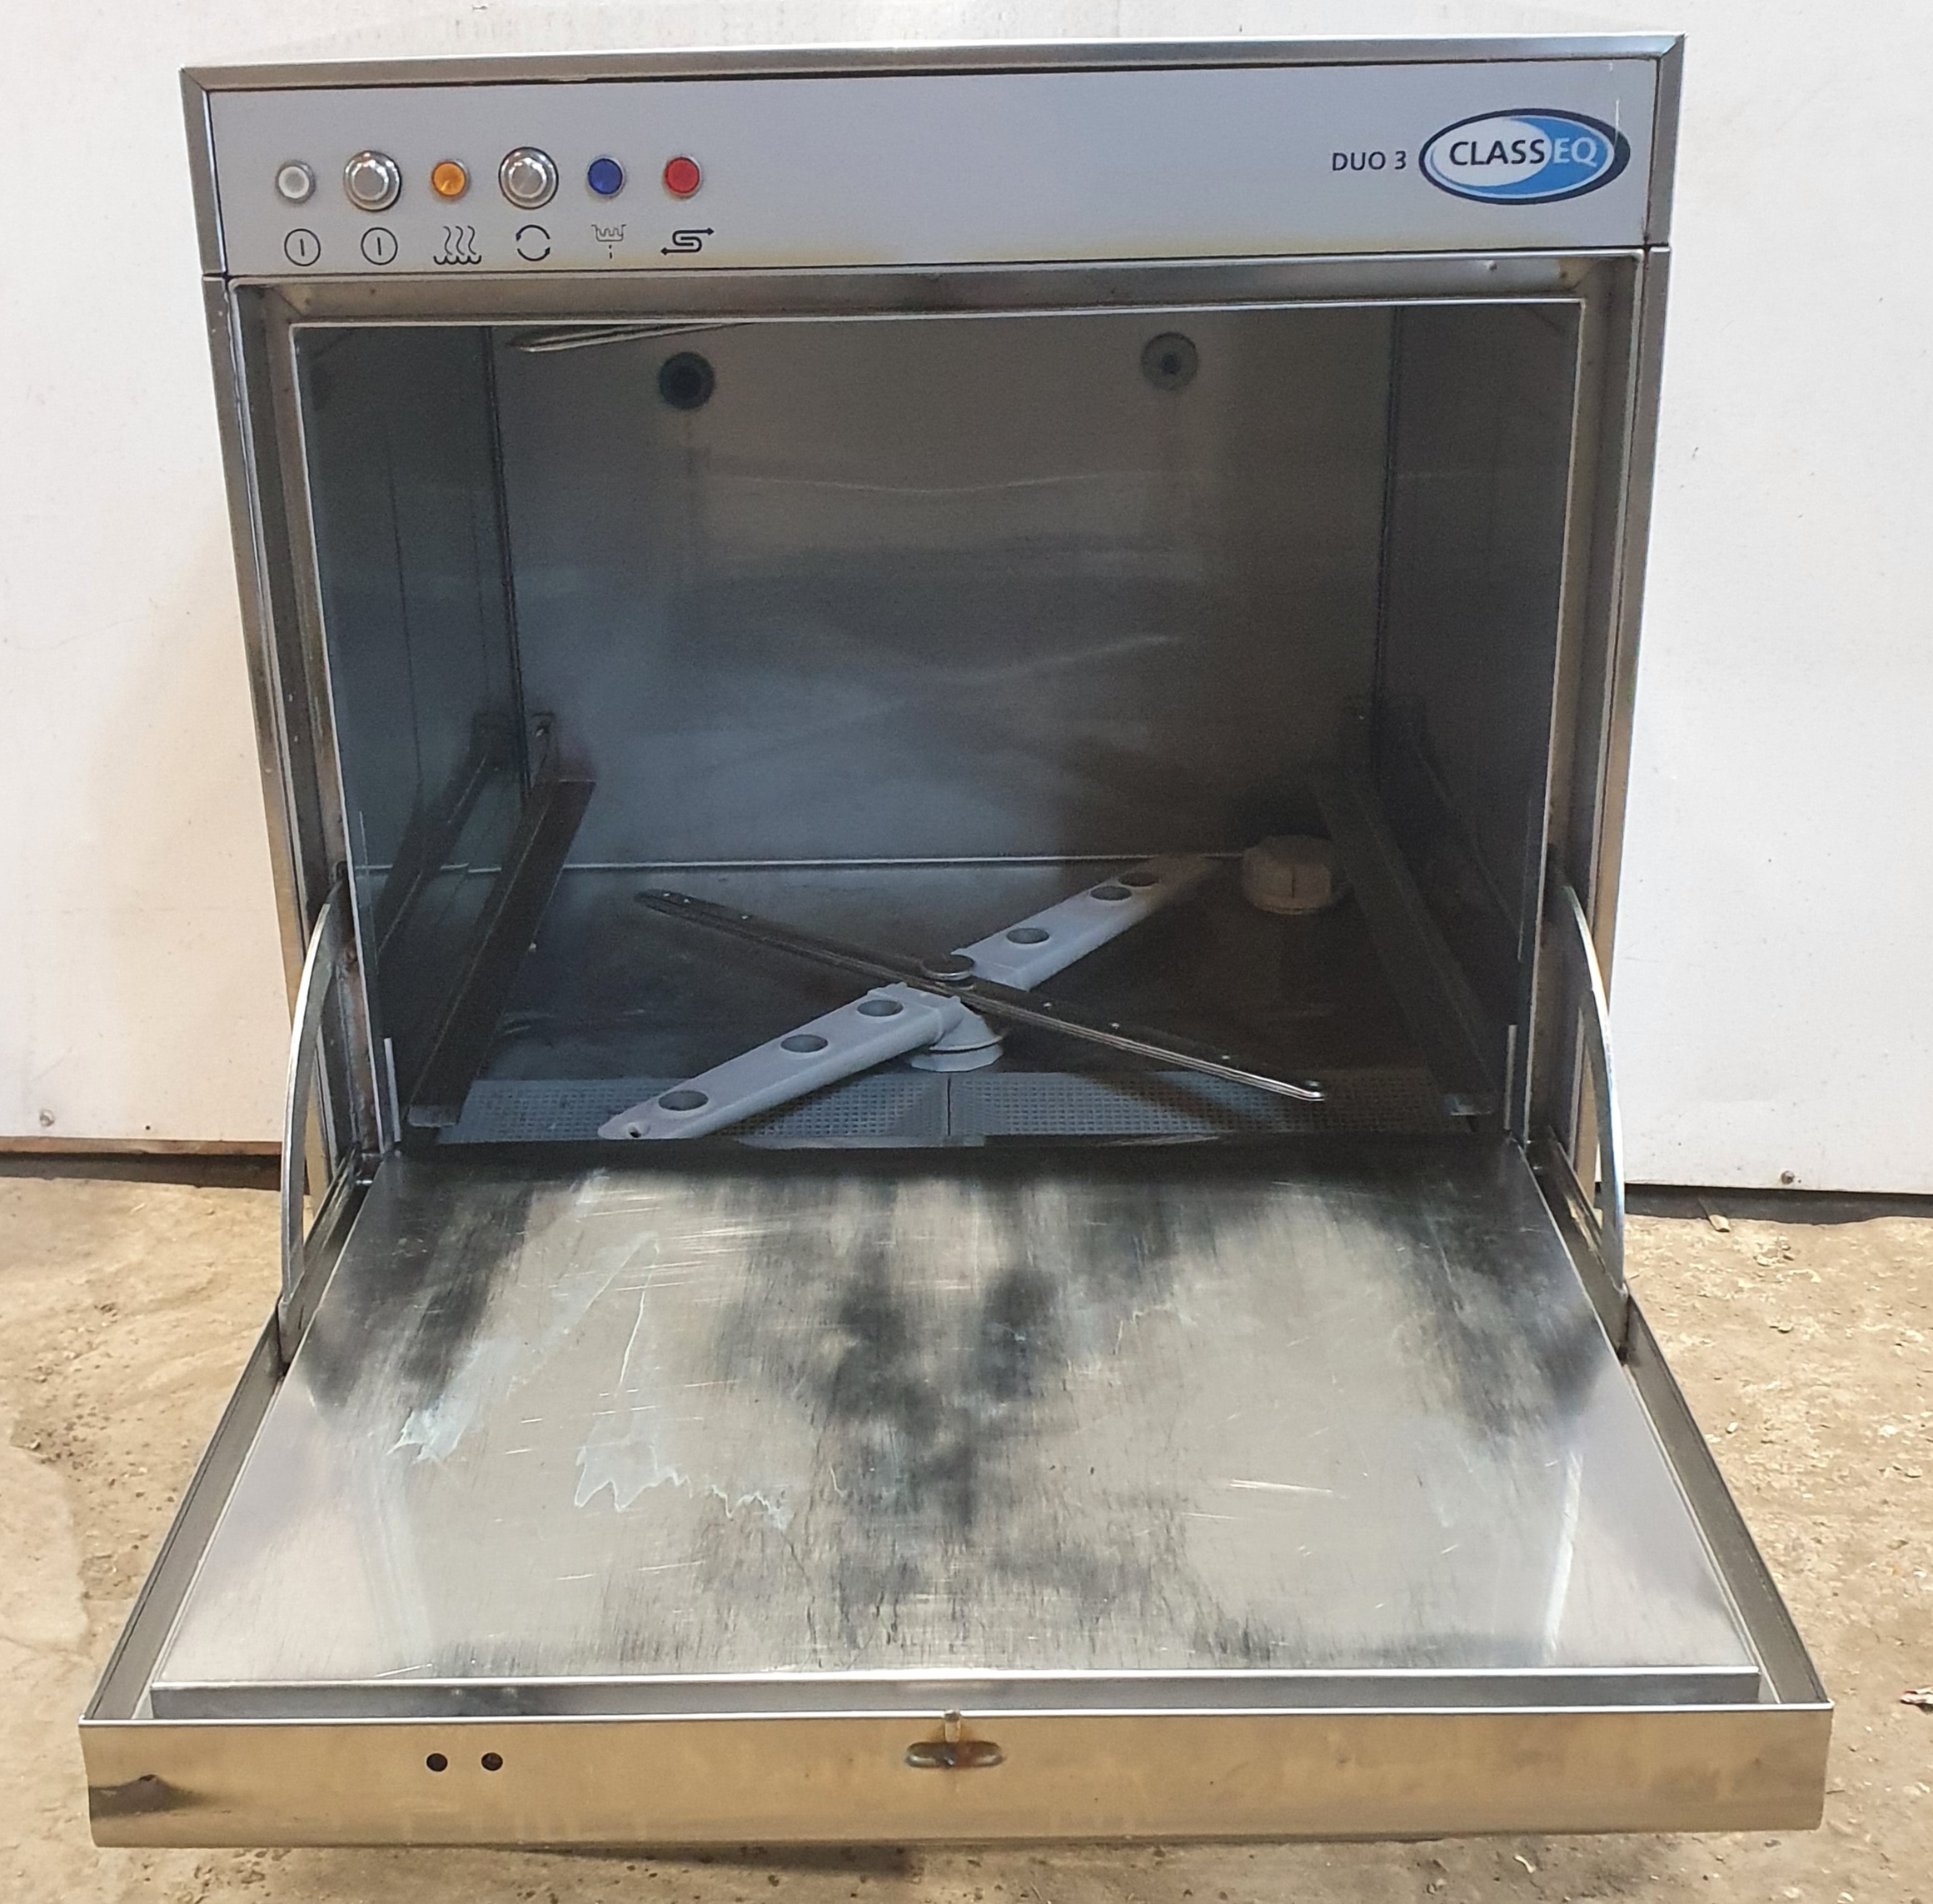 CLASSEQ Duo 3 Under Counter Dish Washer – B Grade ex demo use only.